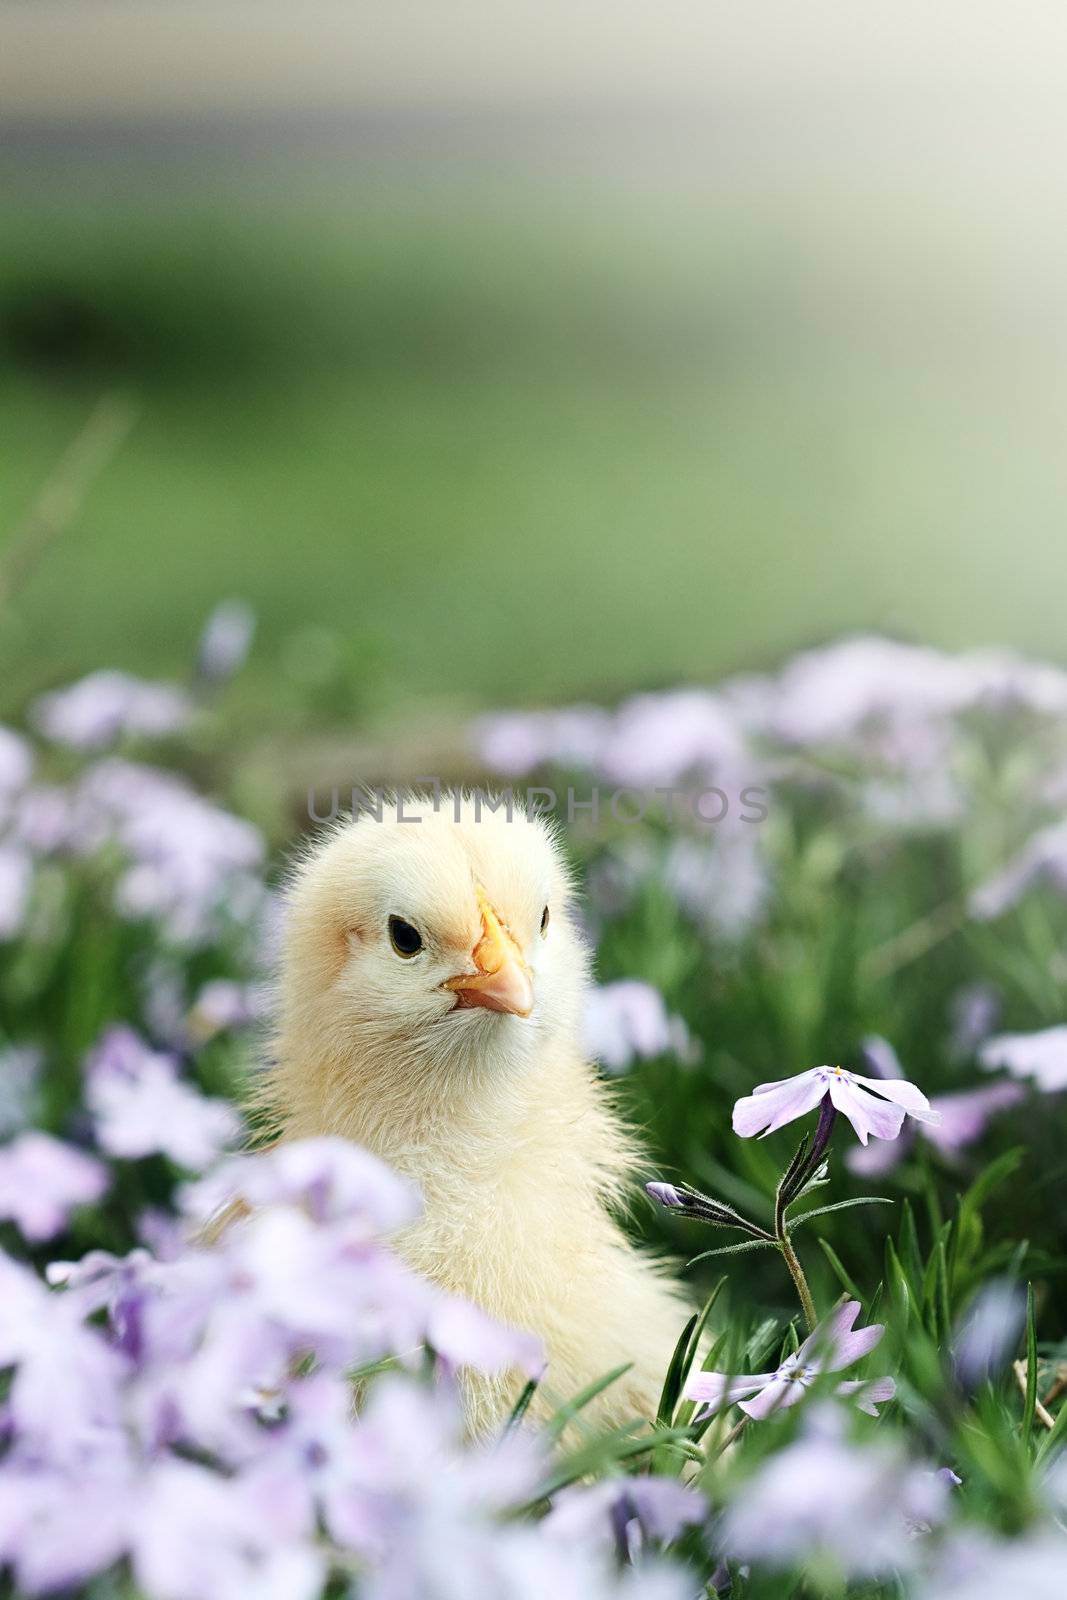 Curious little chick peeking above a bed of lavendar colored spring flowers. Extreme shallow depth of field with some blur on lower portion of image. 